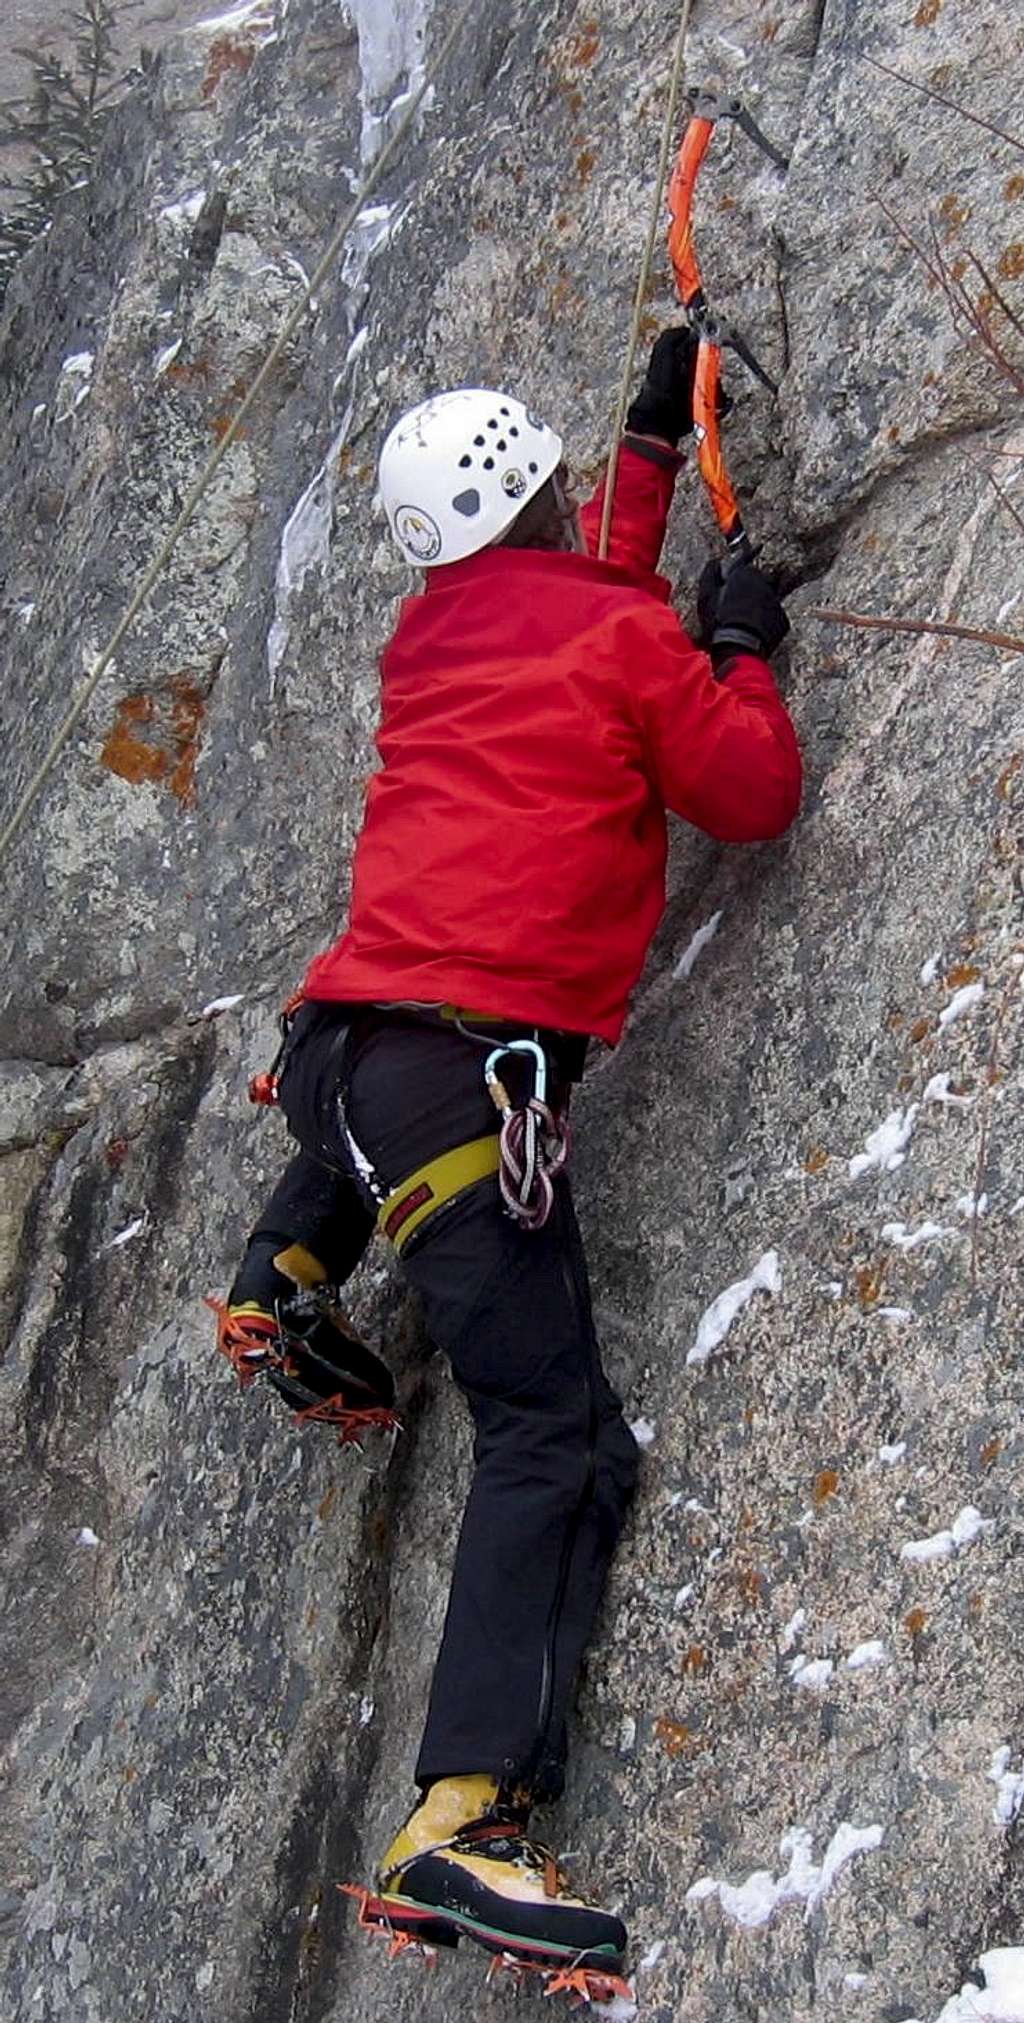 Drytooling= Rock Crack and Sharp Objects